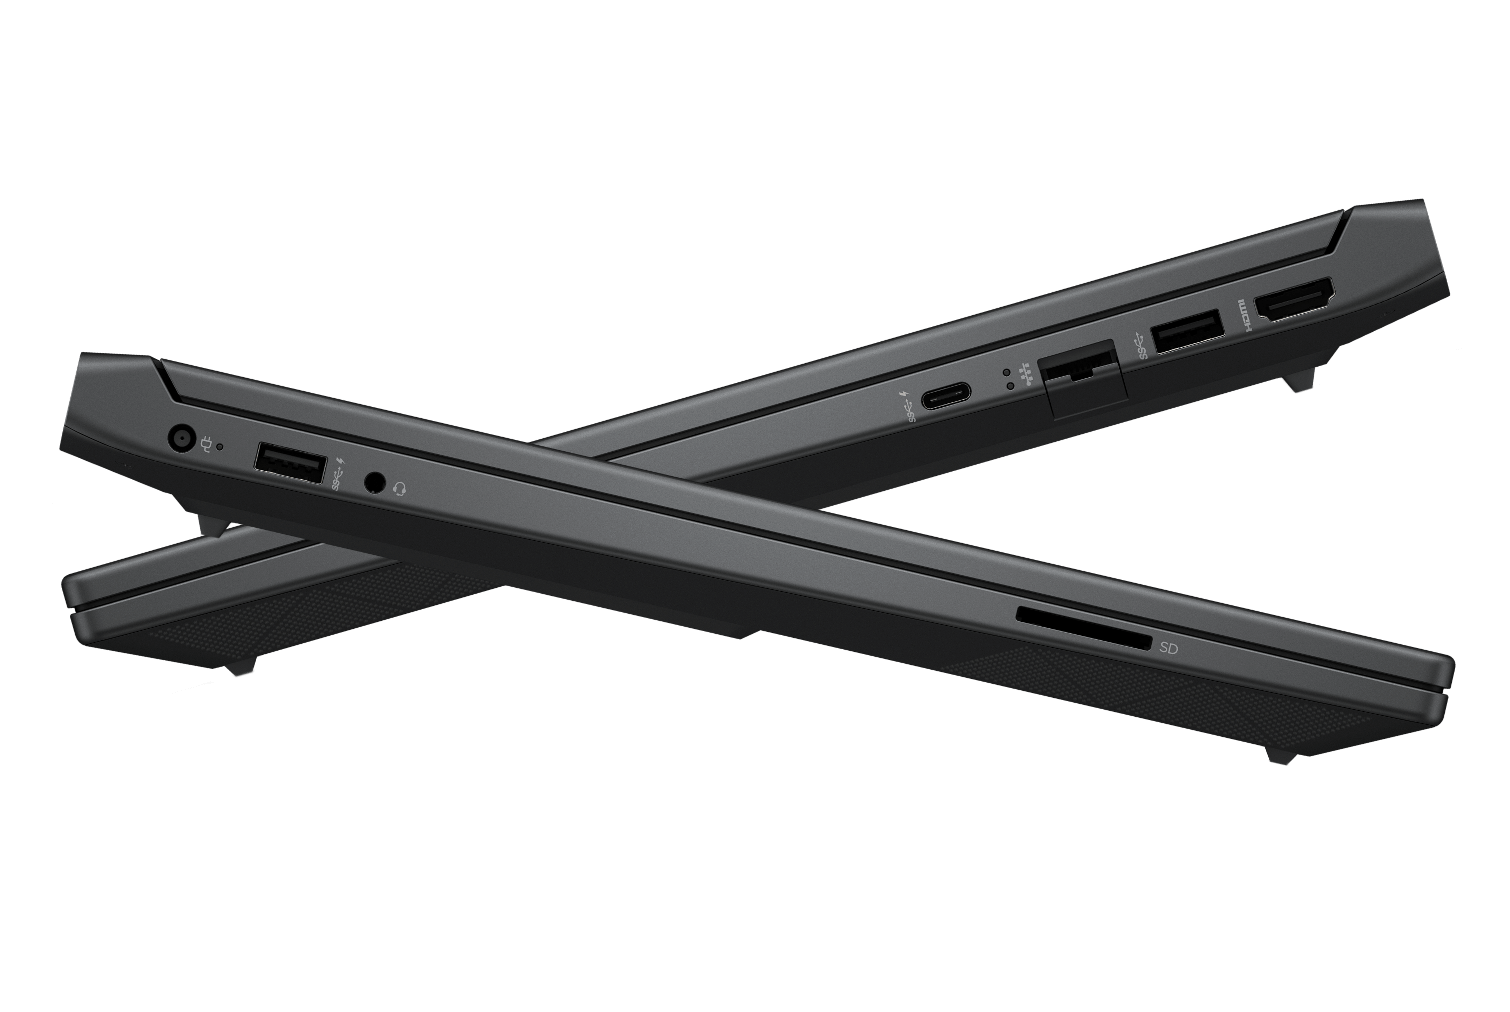 Victus 15 Gaming Laptop ports sections